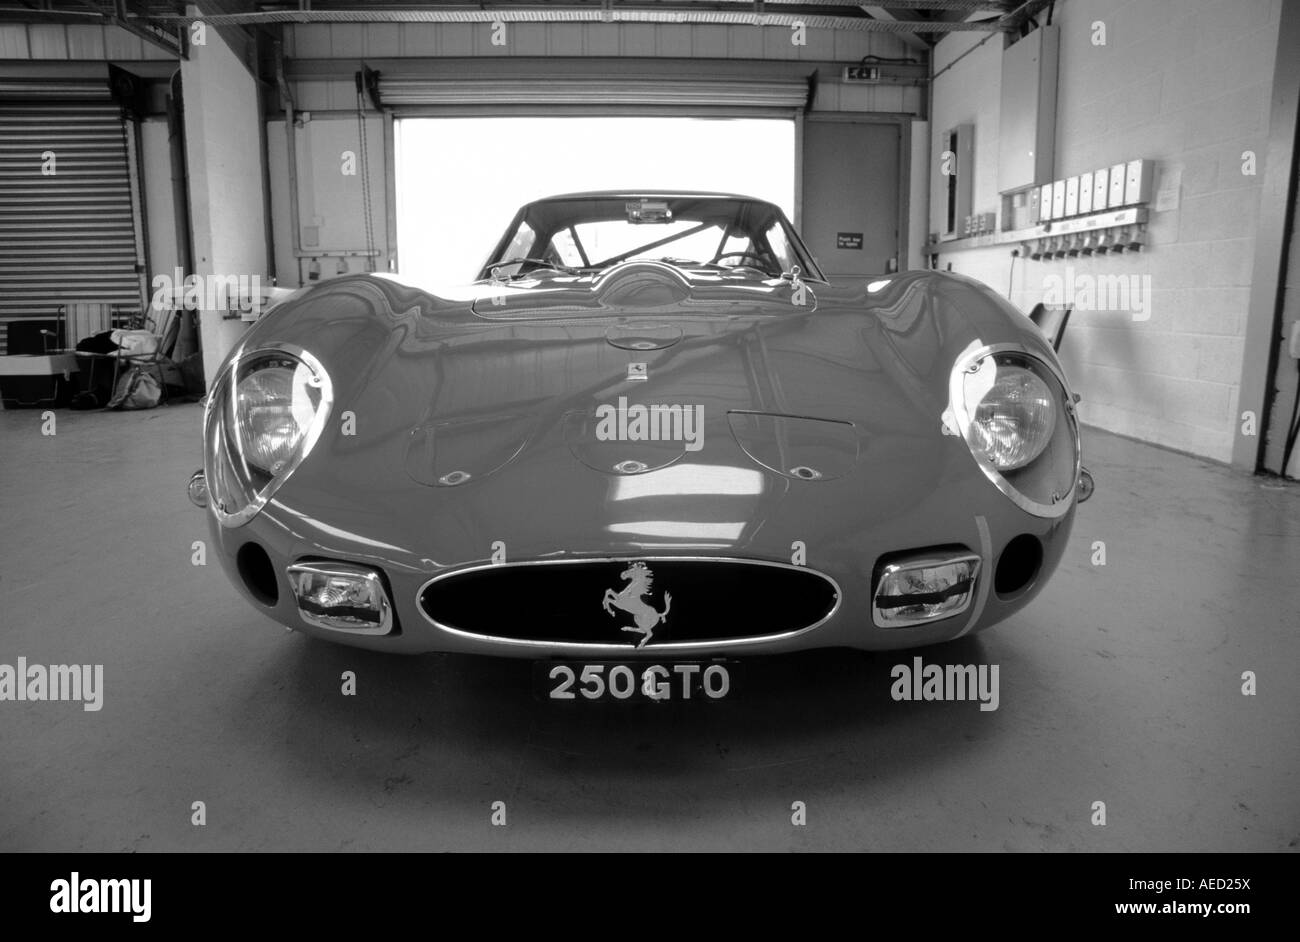 Ferrari 250GTO Berlinetta. Introduced 1962. front shot view angle aspect perspective headon head on low wide dramatic garage Stock Photo